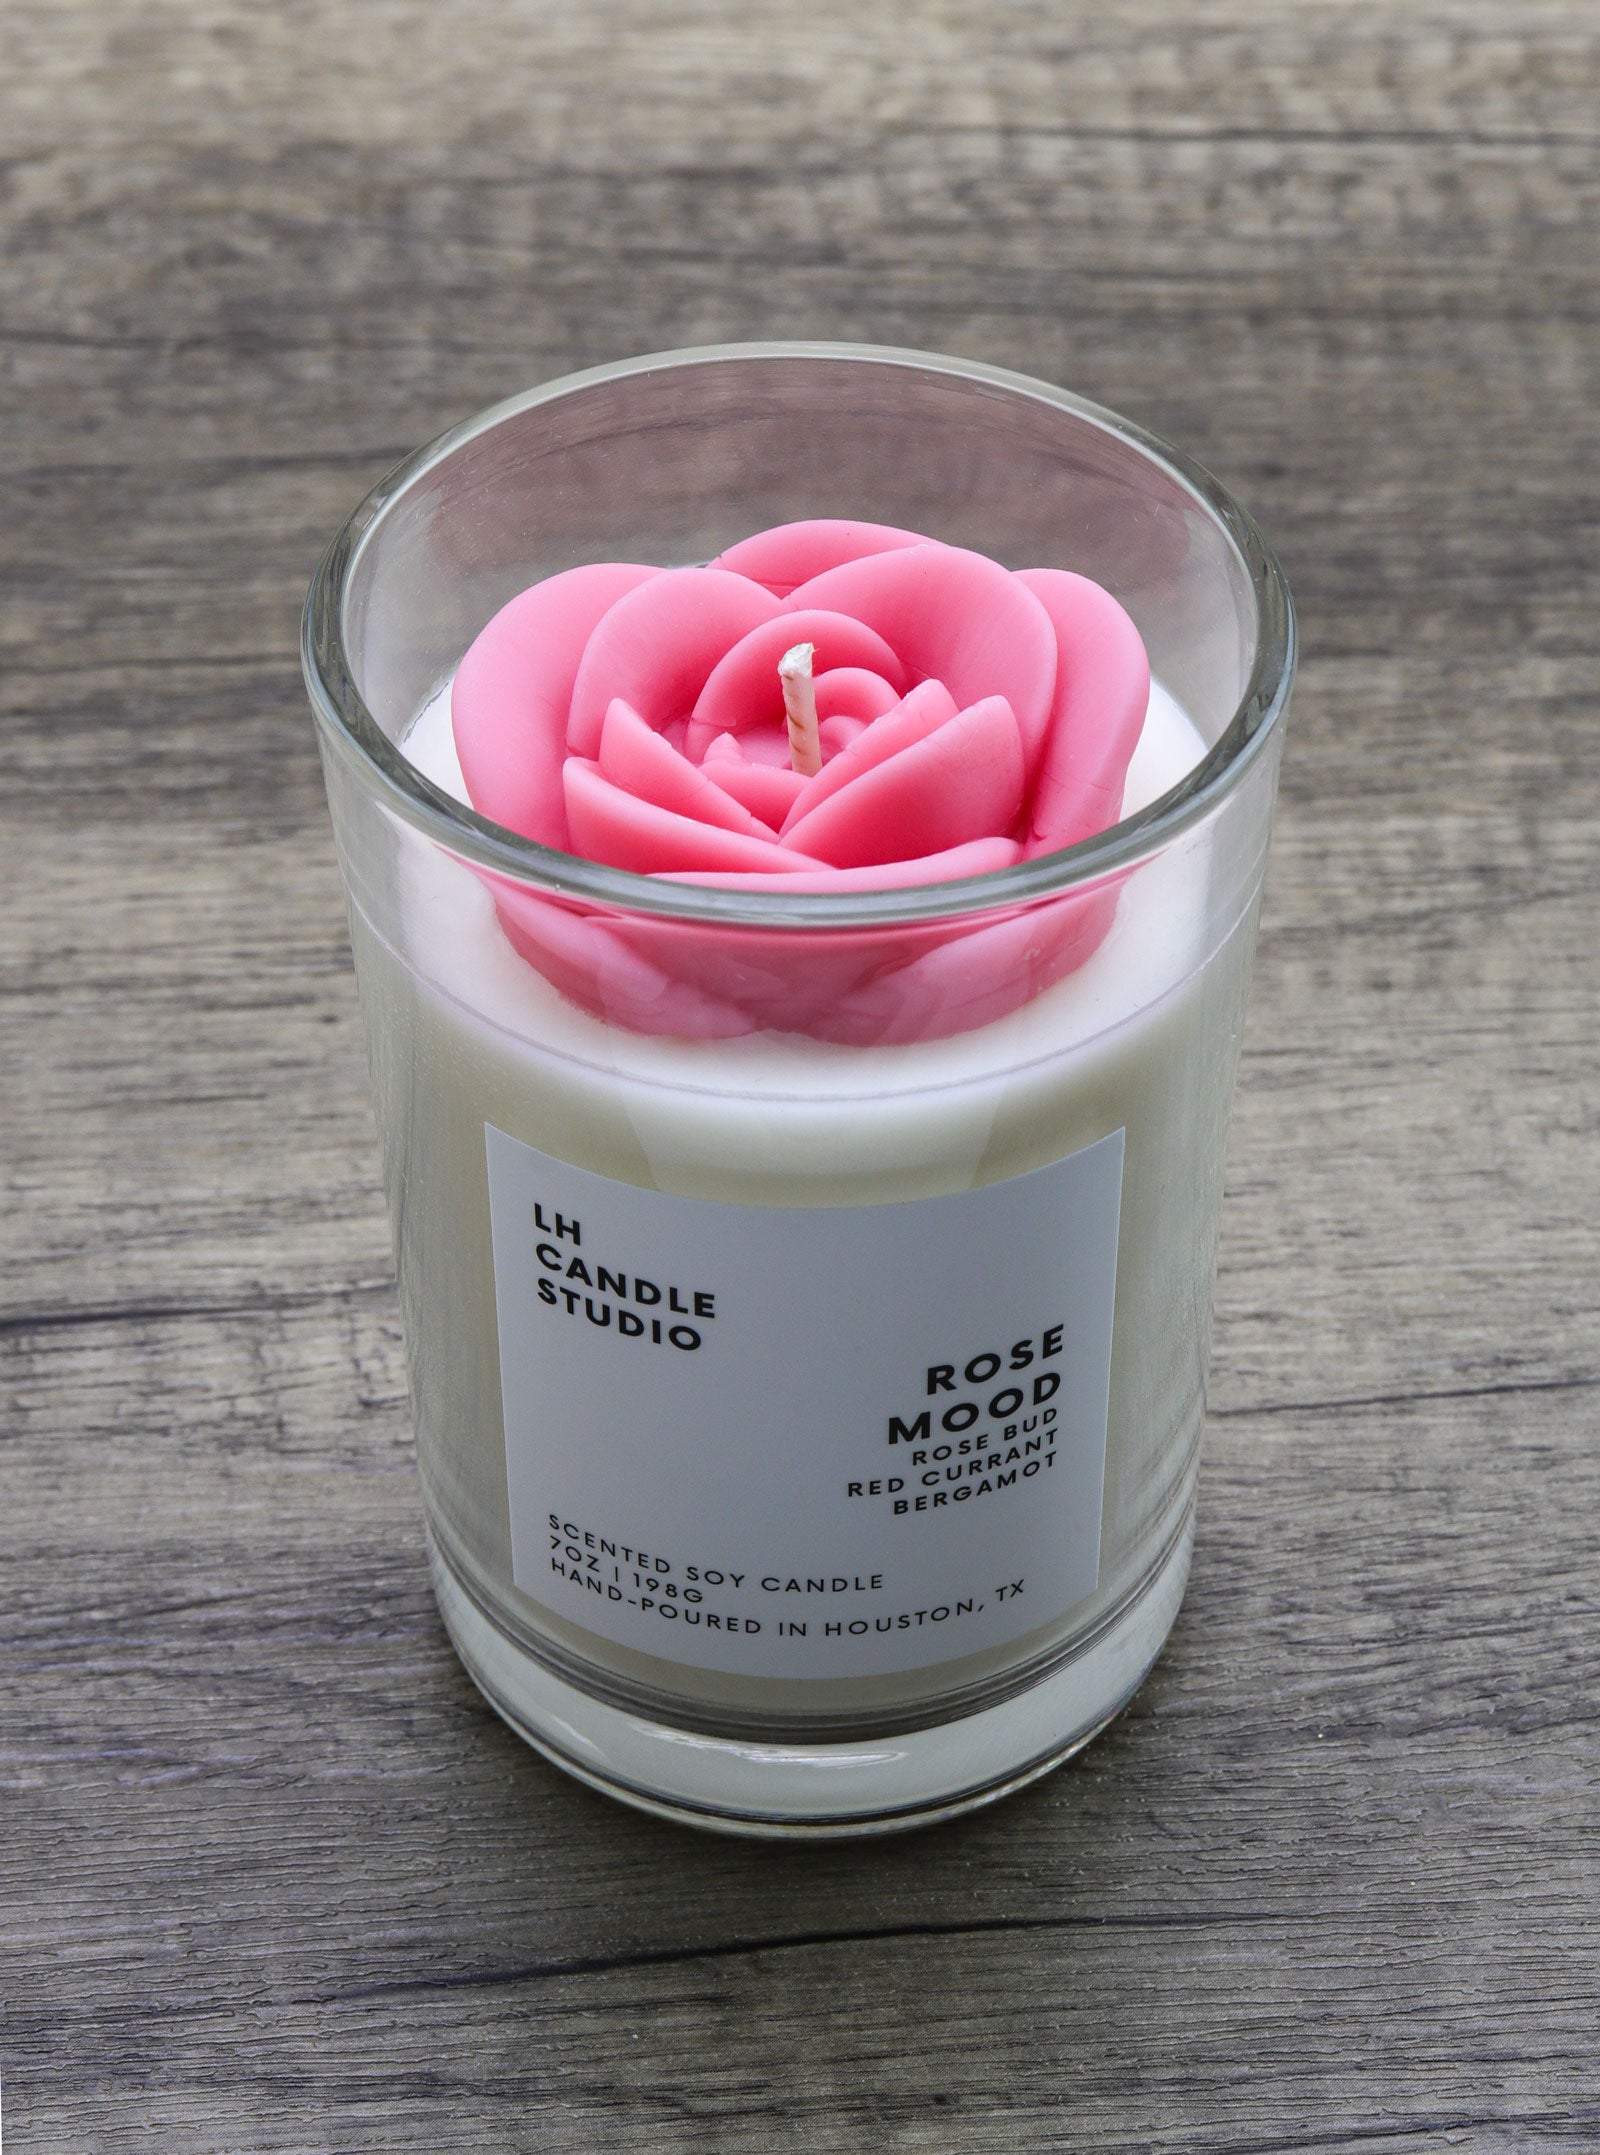 ROSE MOOD SCENTED SOY CANDLE | 7 OZ